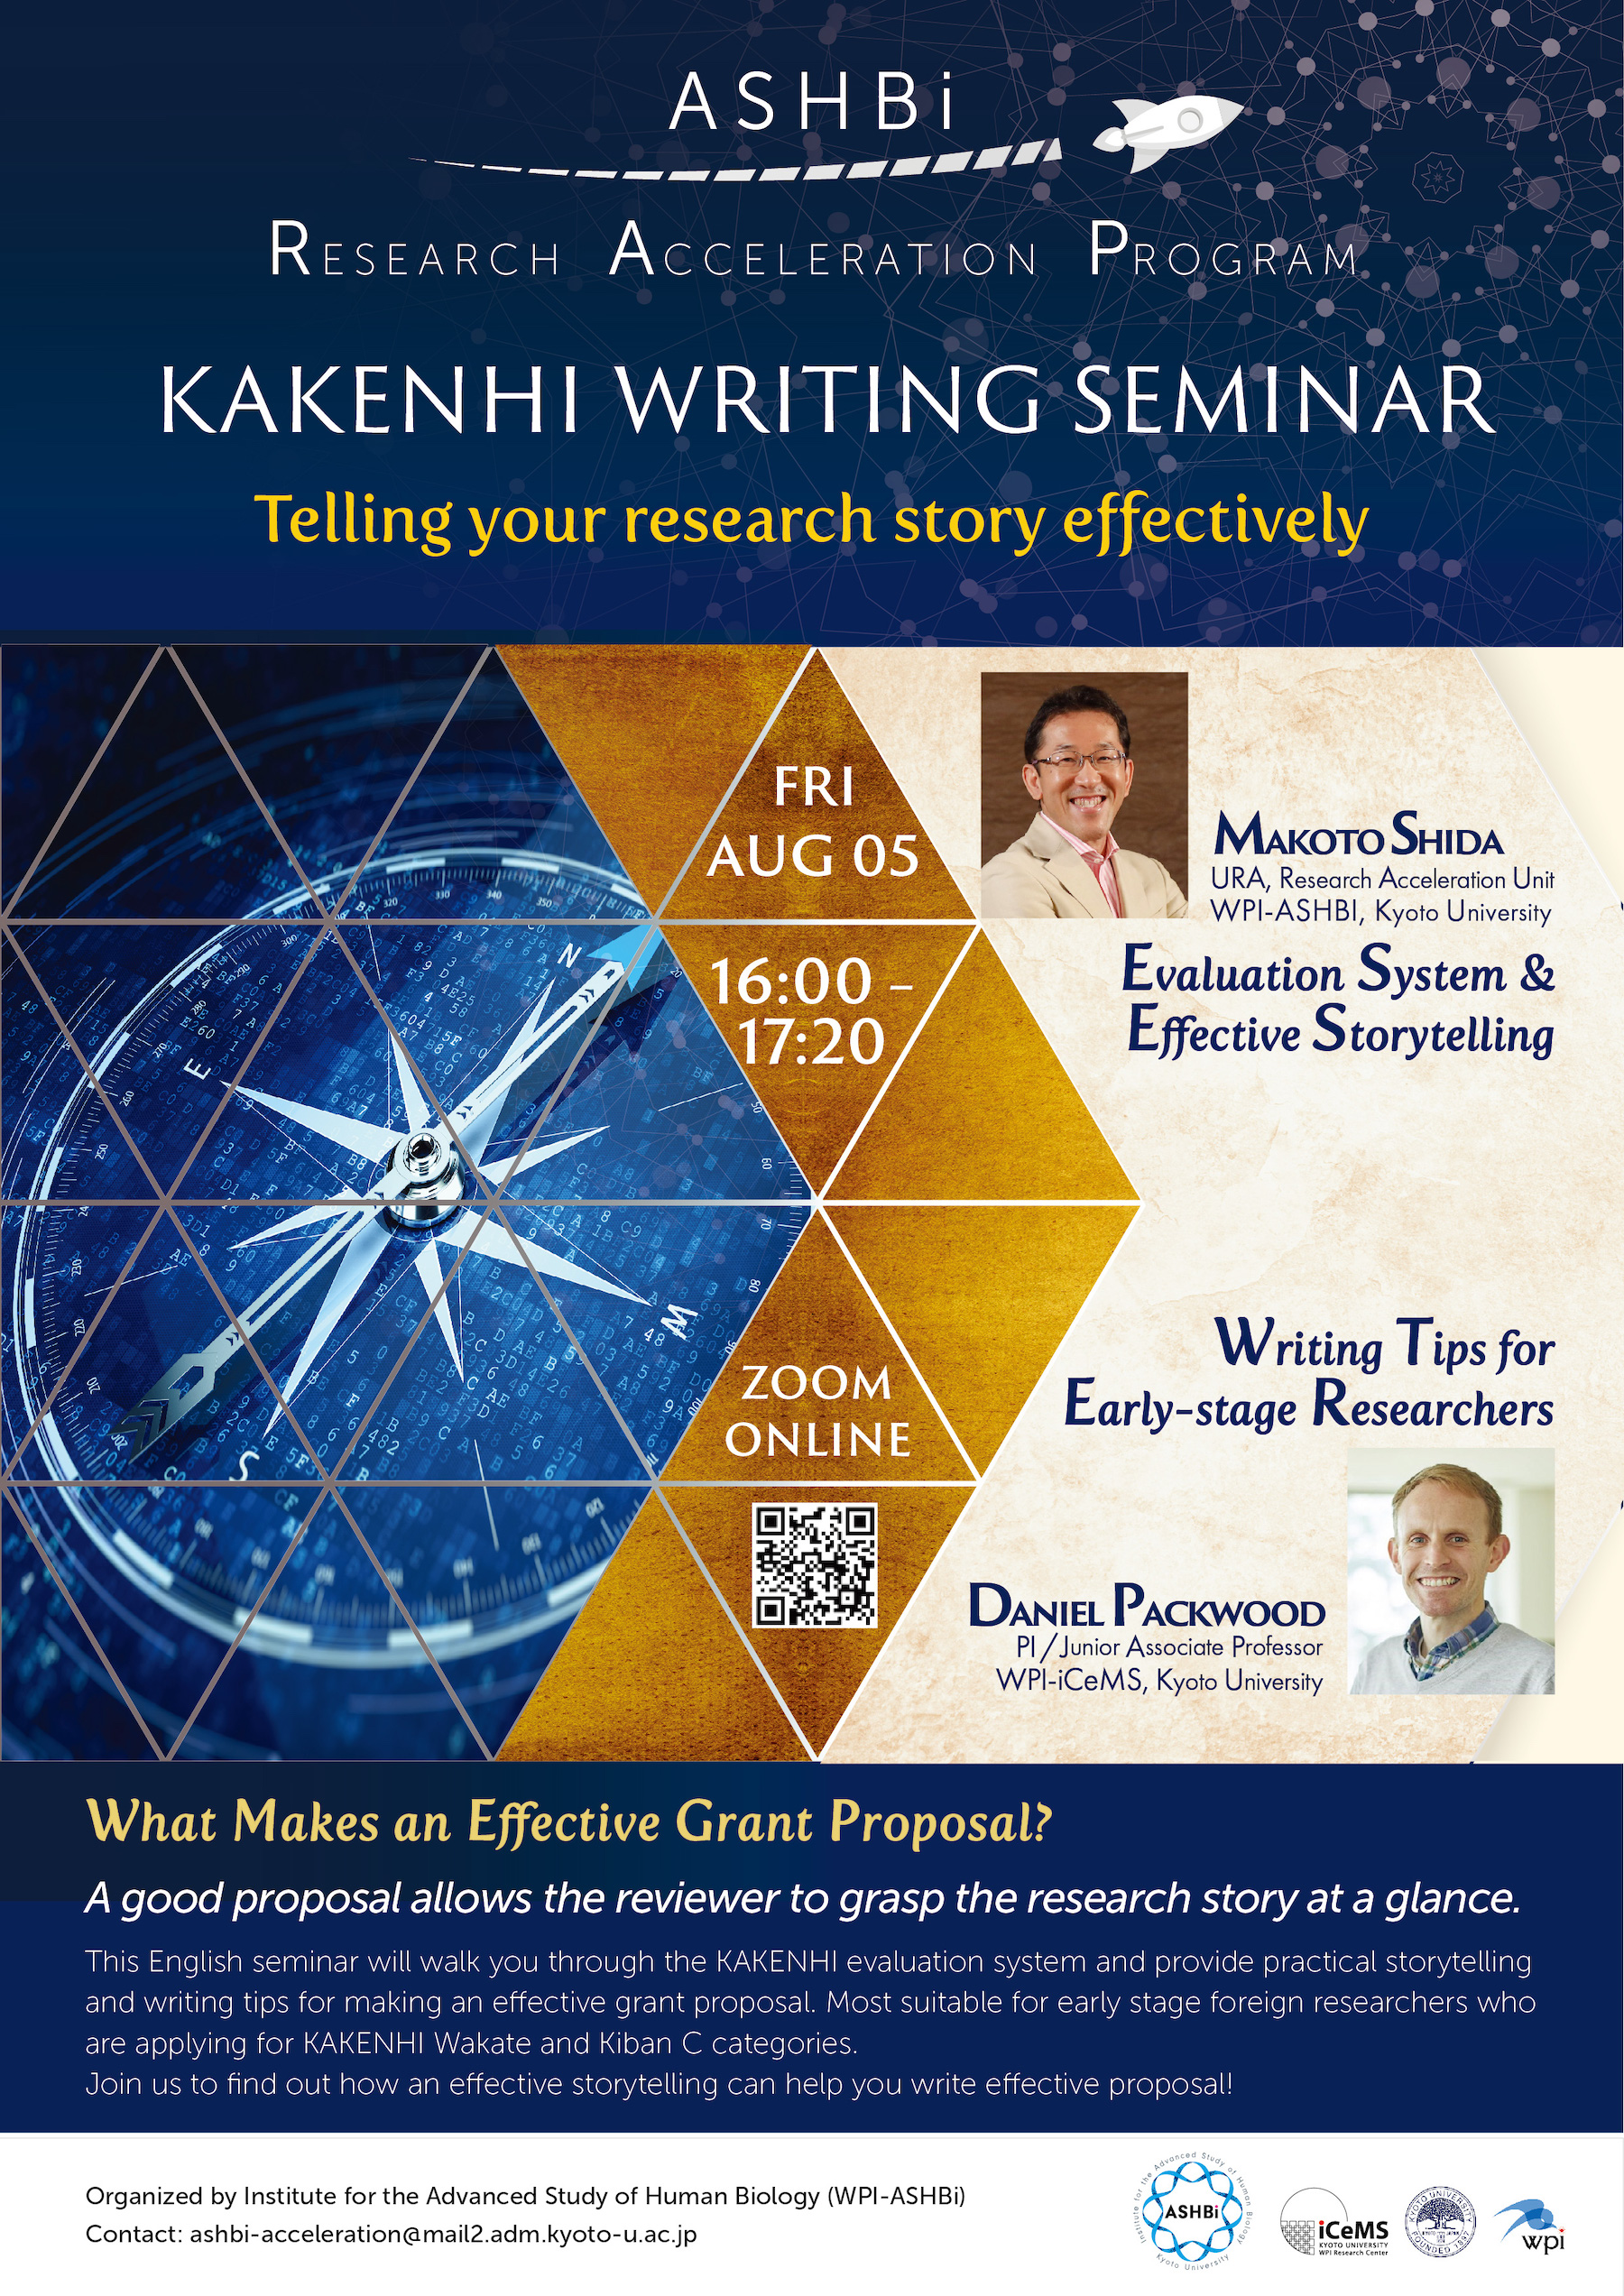 KAKENHI Writing Seminar: Telling your research story effectively